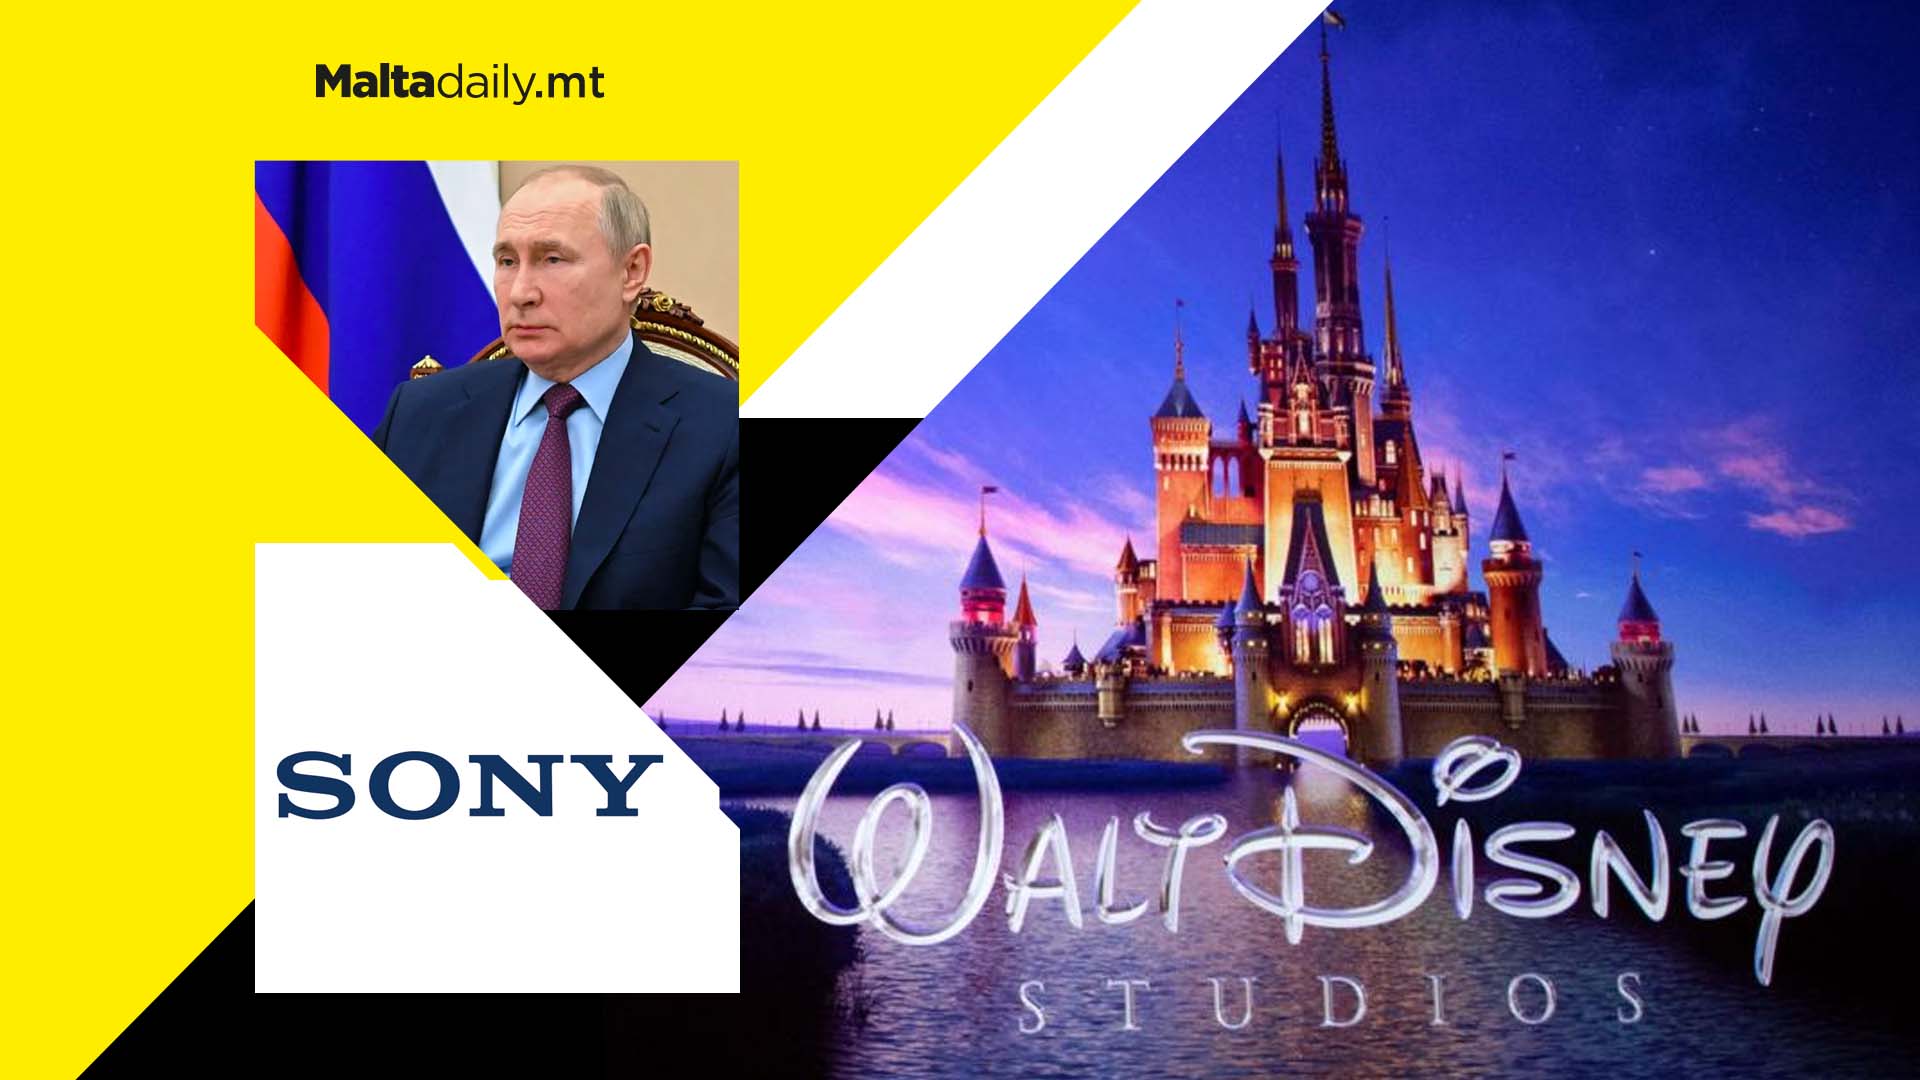 Disney and Sony stop movie releases in Russia due to invasion